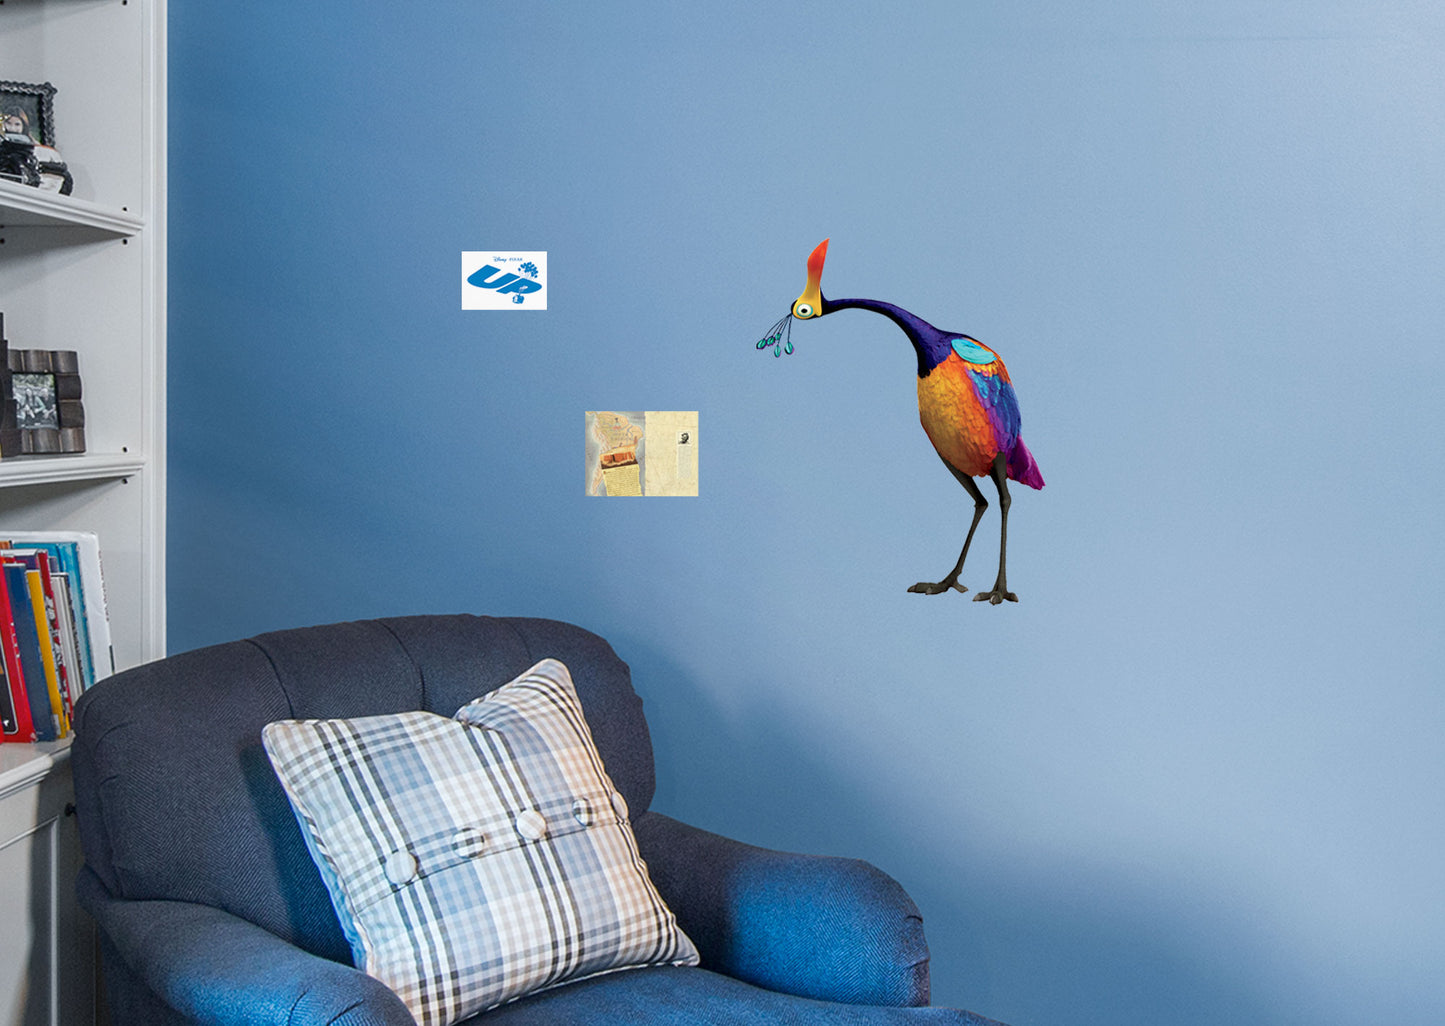 UP: Kevin RealBig        - Officially Licensed Disney Removable Wall   Adhesive Decal